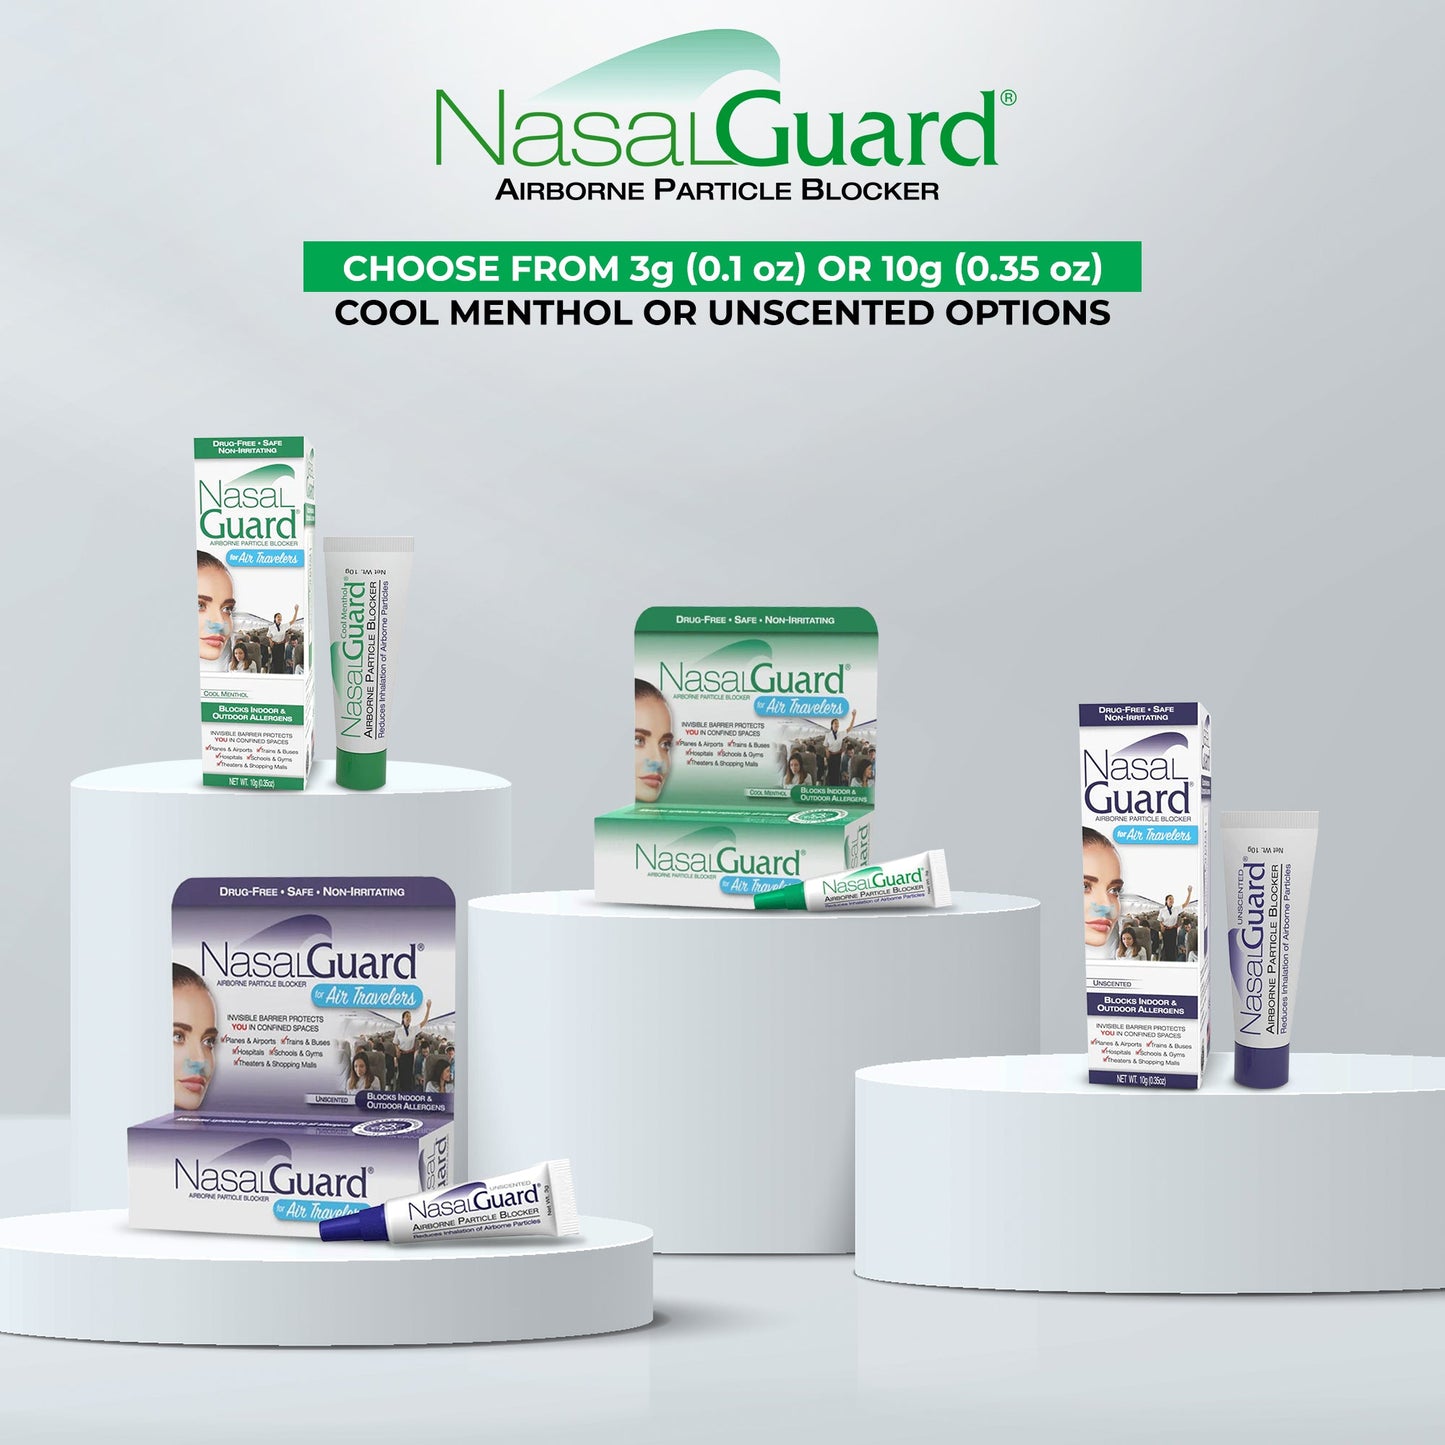 NasalGuard For Air Travelers - Airborne Particle Blocker, Cool Menthol - 10g (Pack of 6)